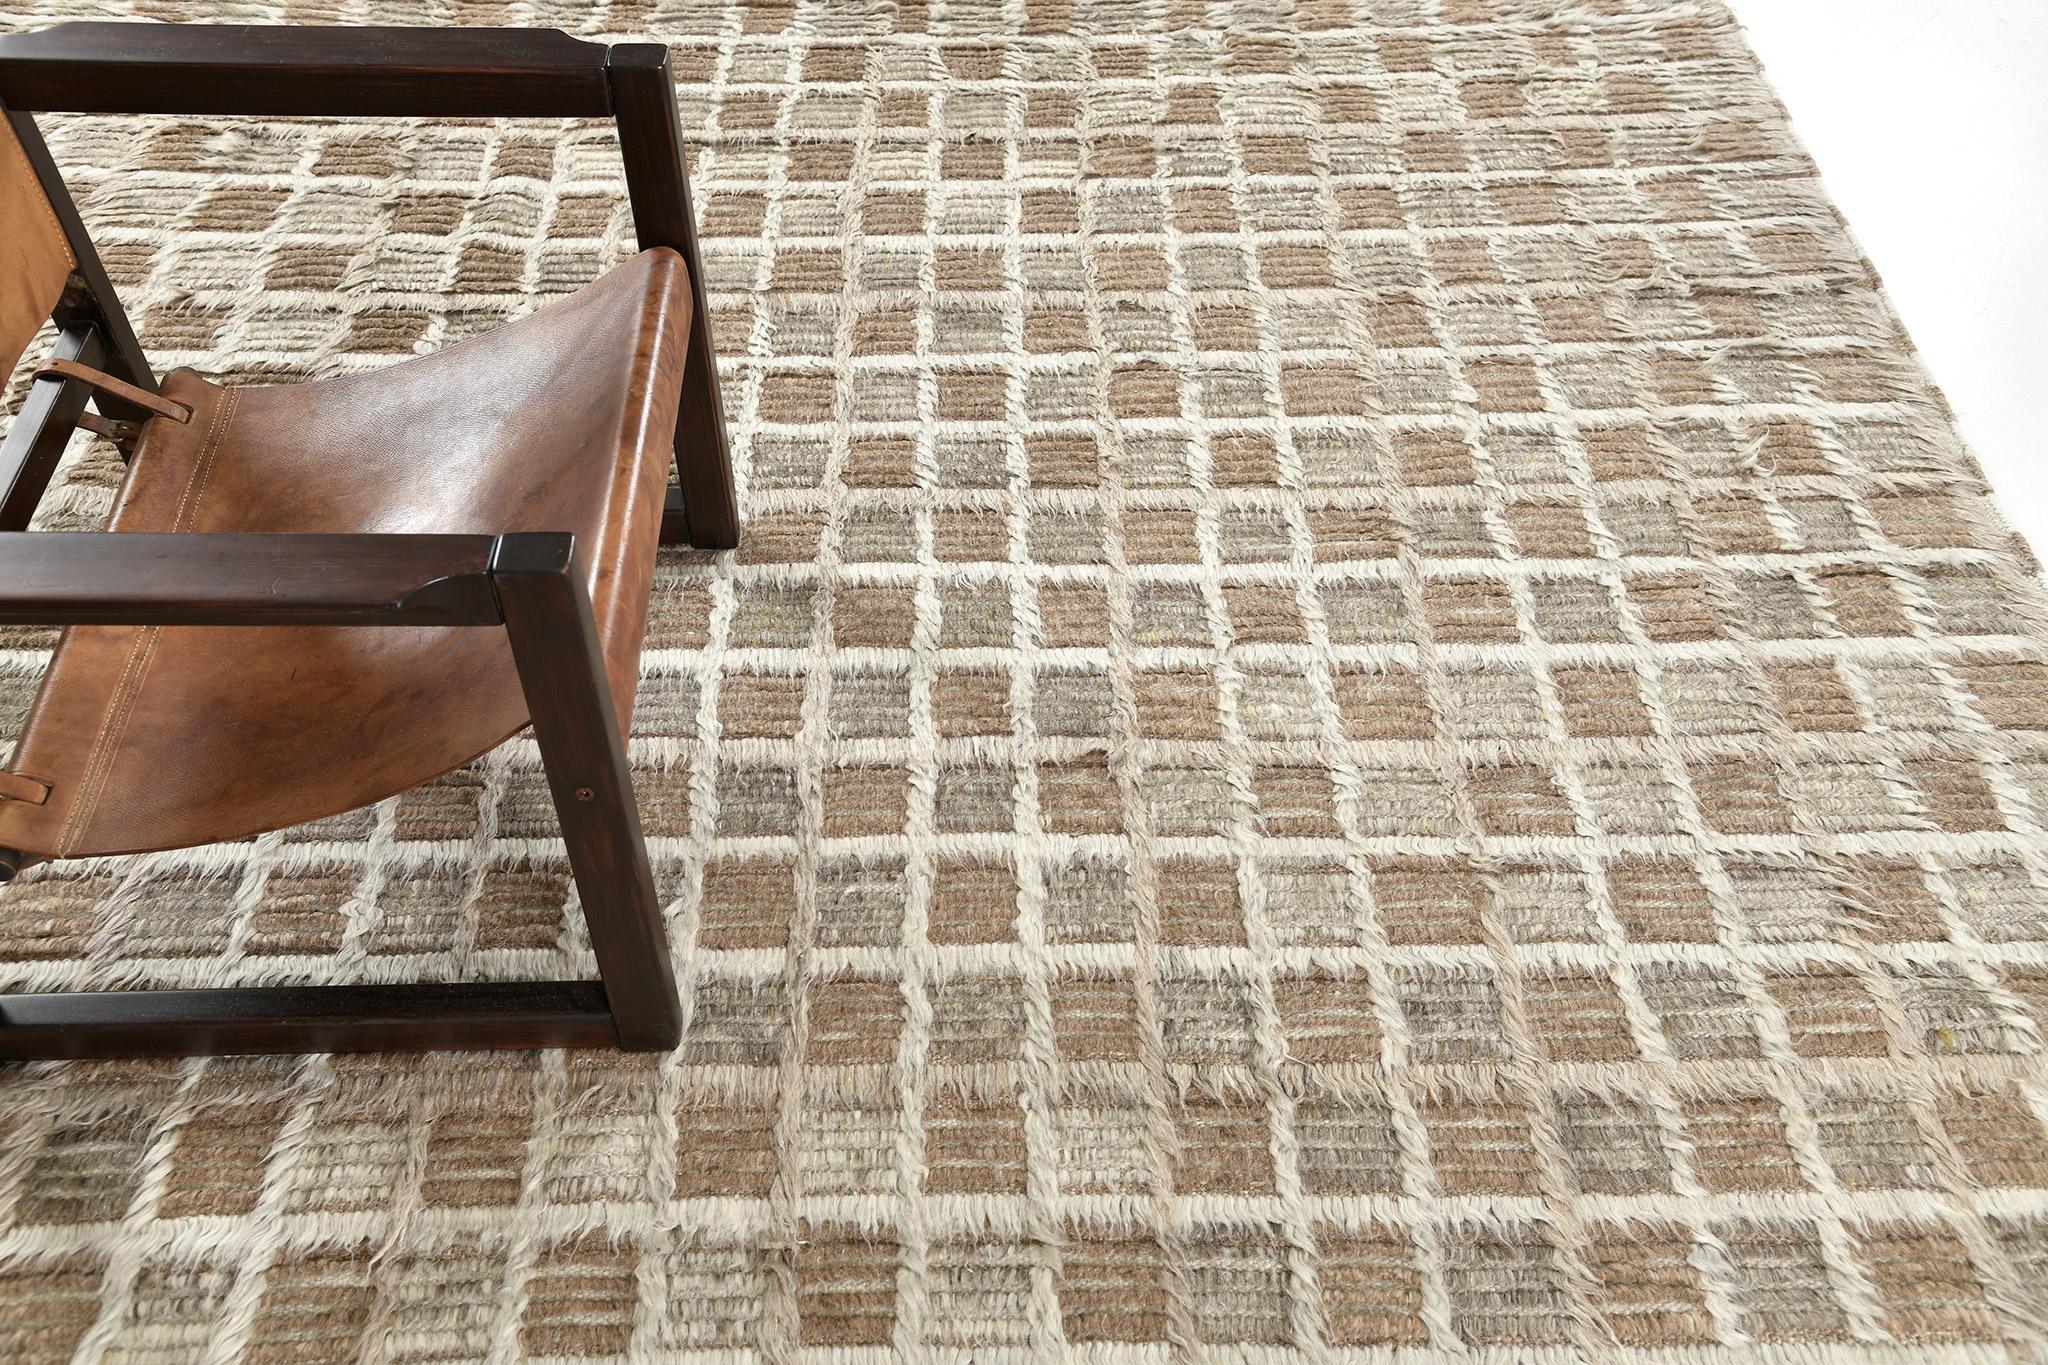 The Miha rug features a checkerboard motif interplaying shifted tonal grid lines in a multi-pile design. This piece is rendered in subtle neutrals encompassing warm clay-taupes and khaki grays. 

An extension of Mehraban’s popular Amihan design, the